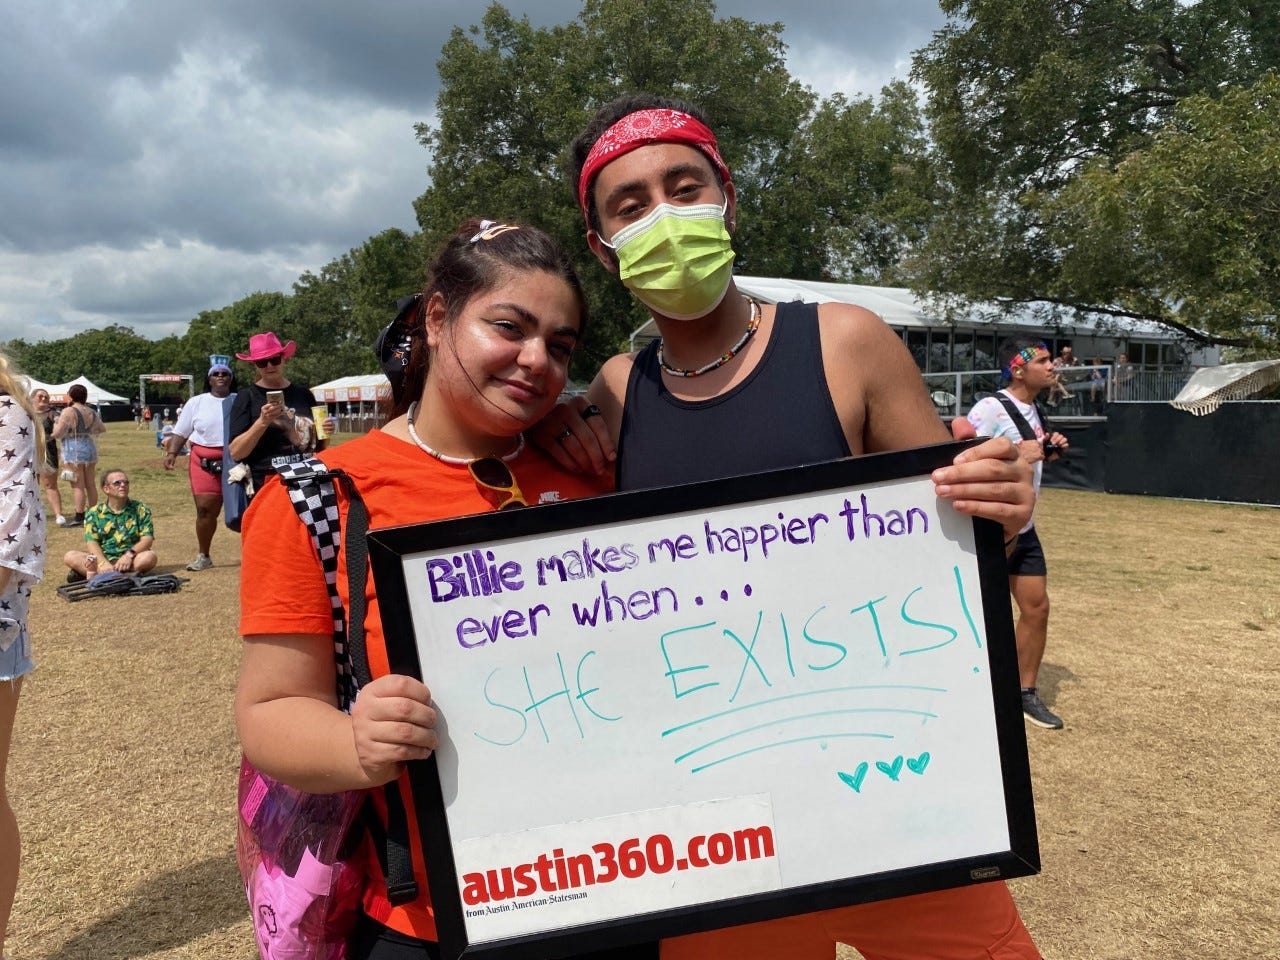 Judy Akrim, left, and Yazan Hamzeh waiting for the Billie Eilish show on Saturday Oct. 2, 2021. Both are from Austin, Texas.